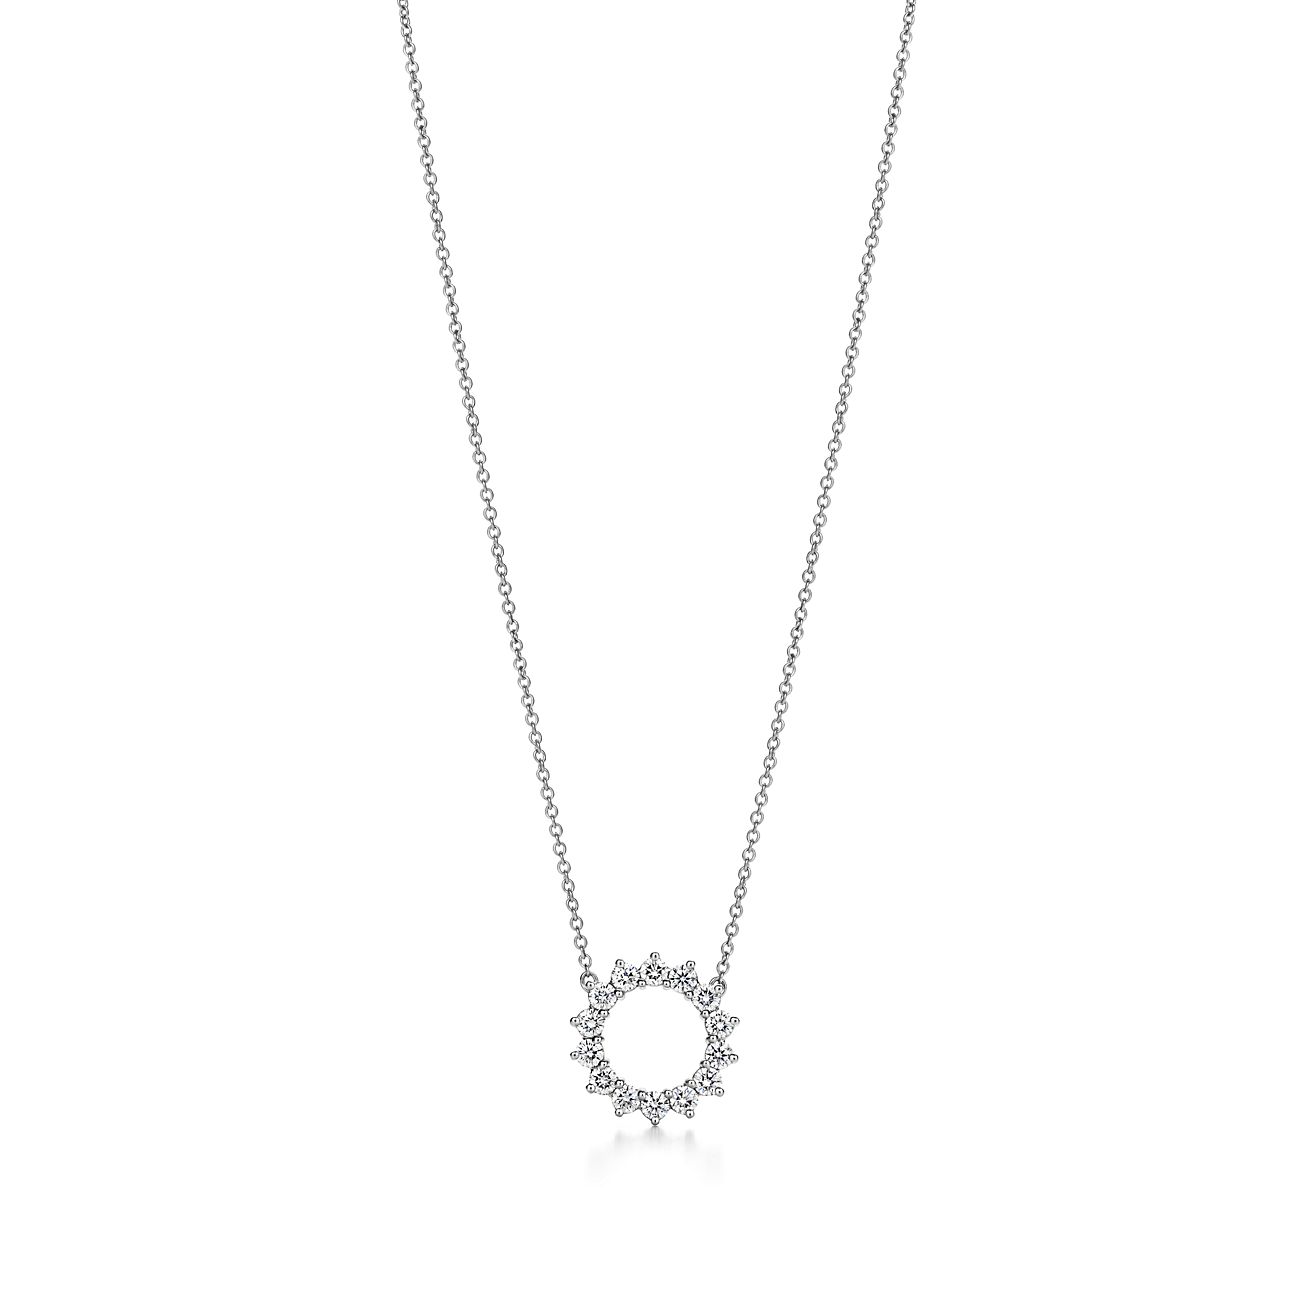 tonic-lateral-forged-open-circle-short-necklace – Mar Silver Jewelry